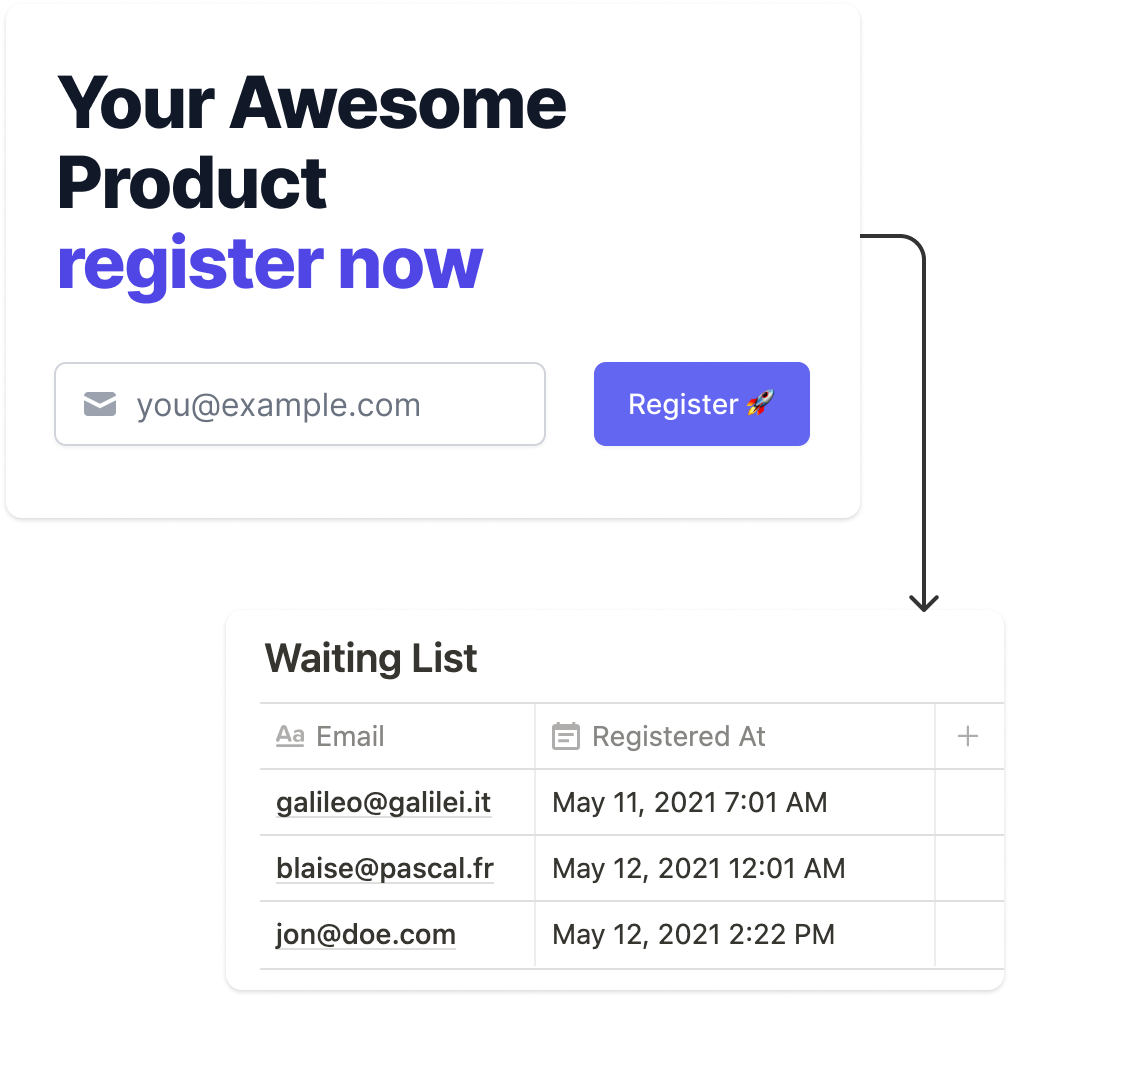 SparkleForms used for creating a waiting list